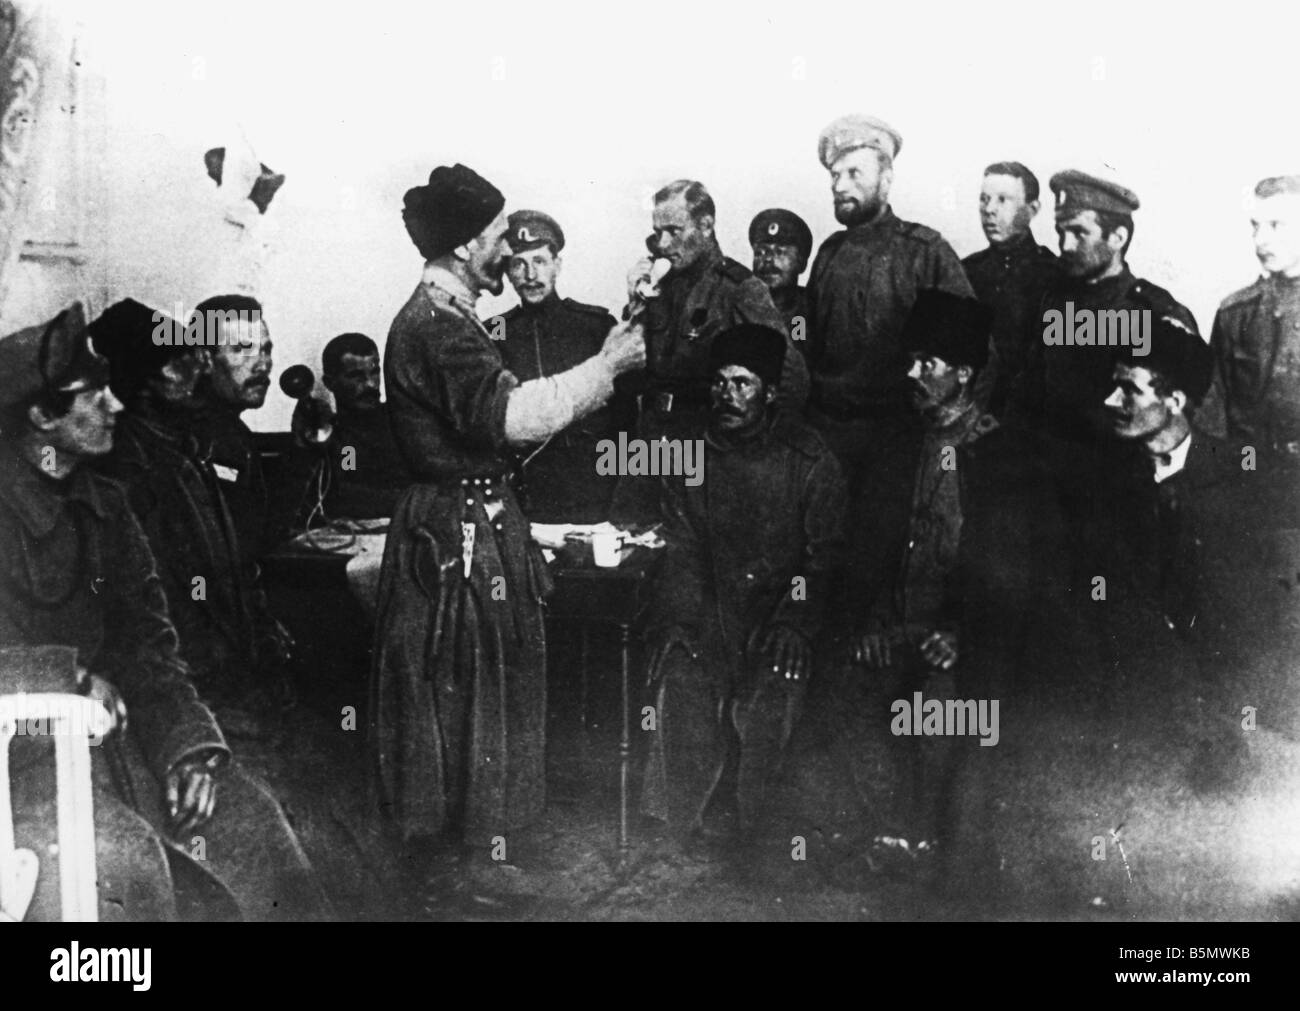 9RD 1917 0 0 A3 Bolshevik Agitation 1917 Photograph Russian Revolution 1917 A Bolshevik activist talking to soldiers in the army Stock Photo